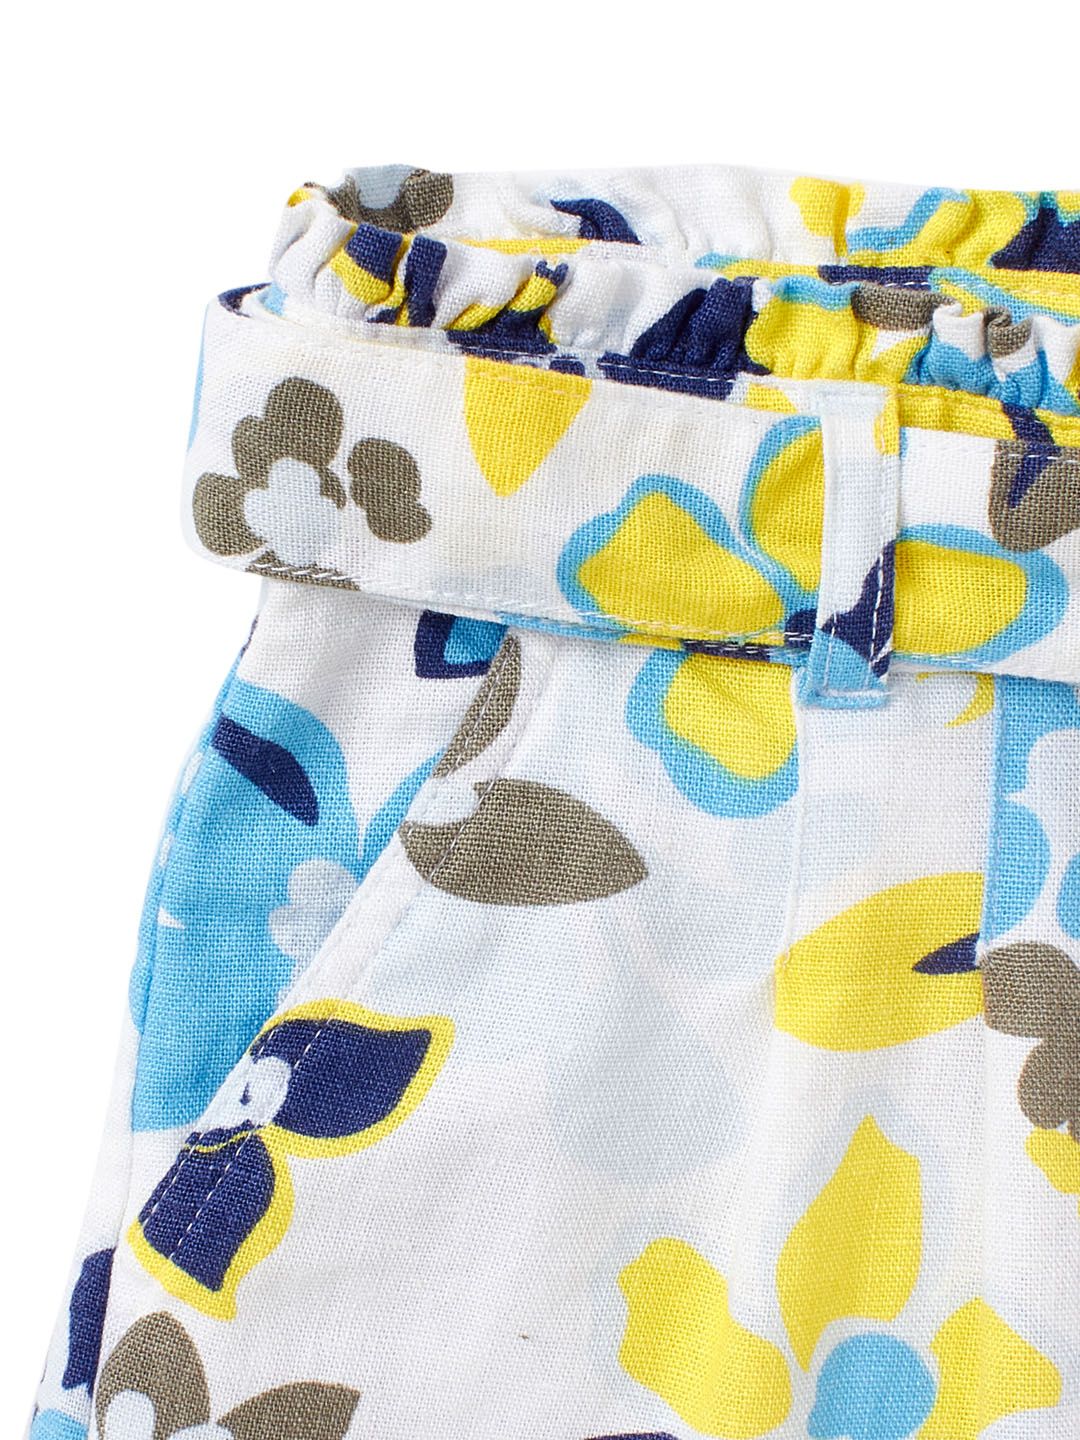 Buy Girls Shorts Floral Print - Multicolor Online at Best Price